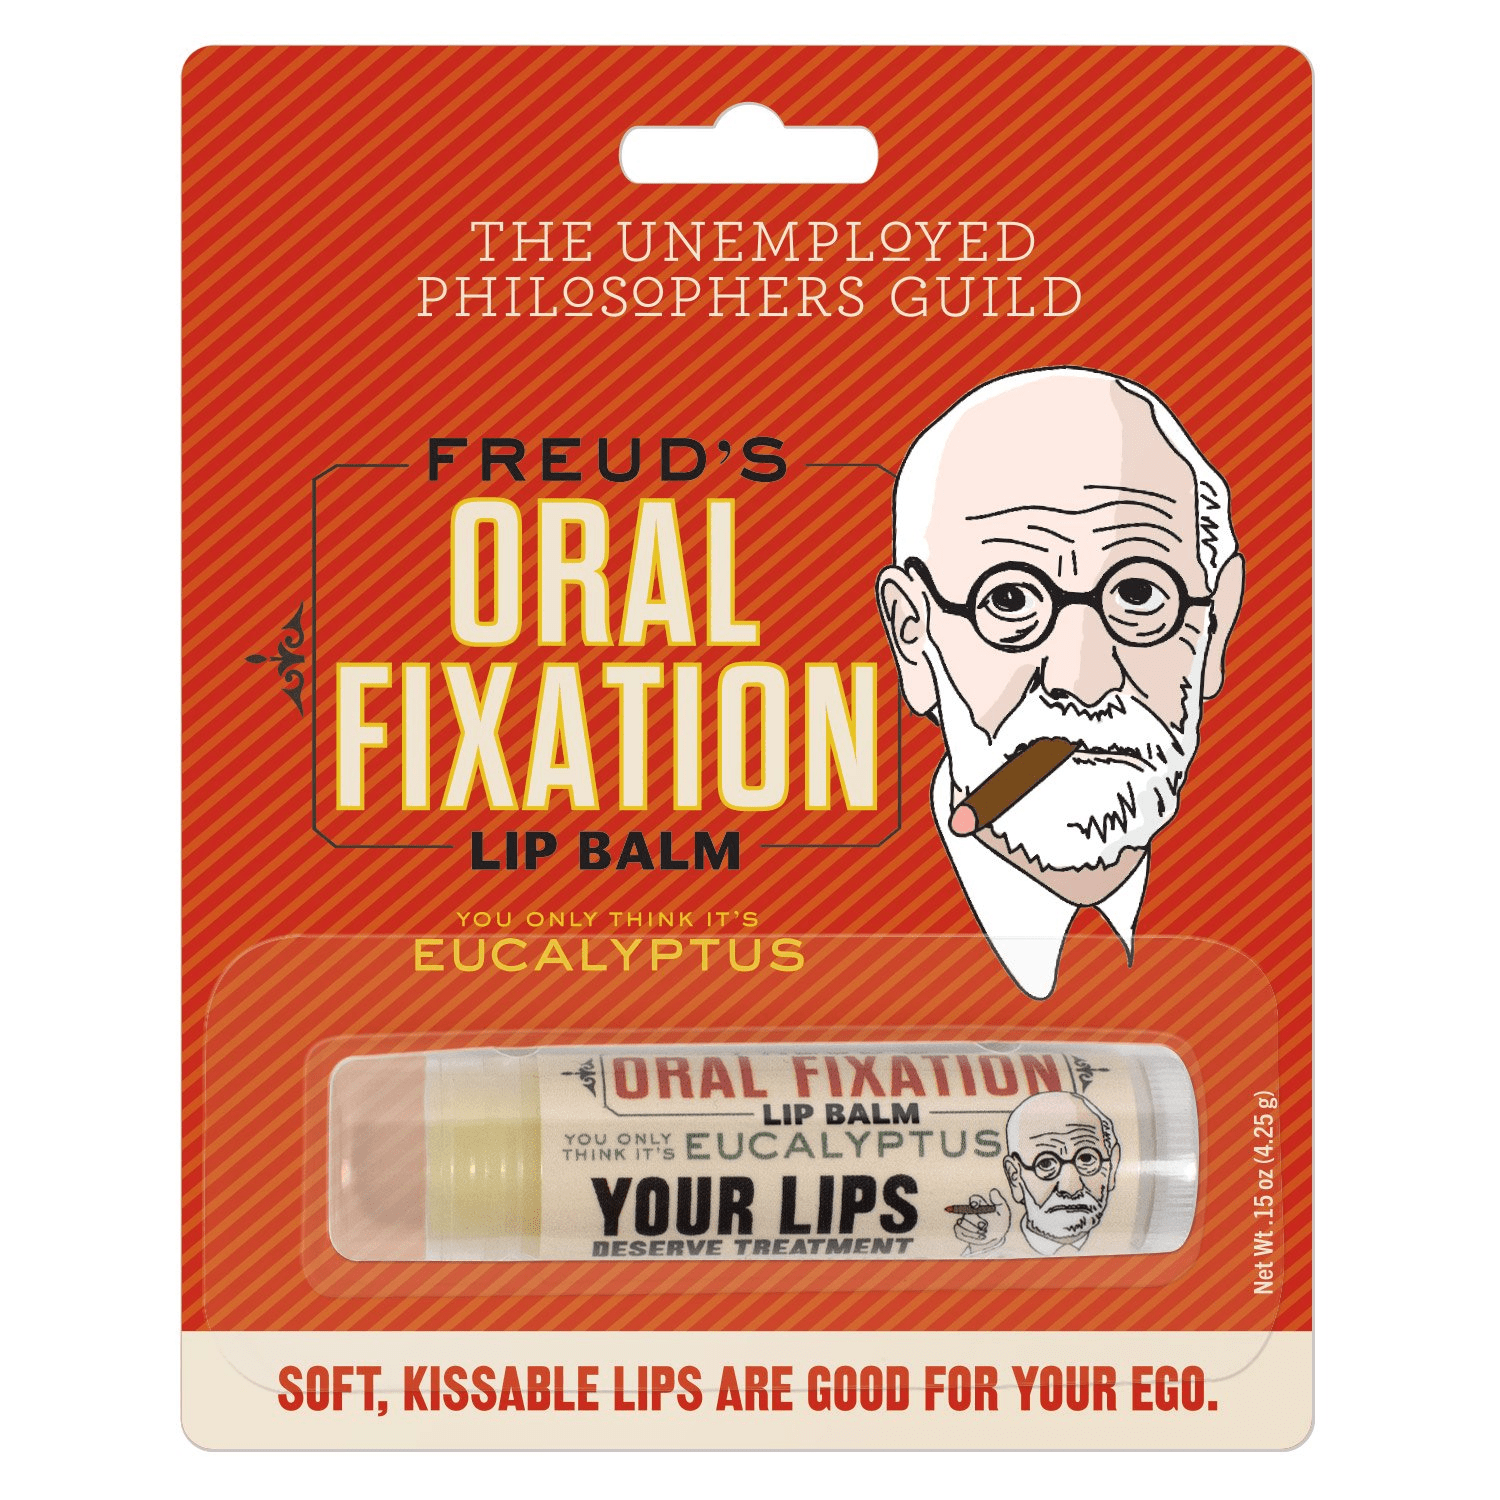 Freud's Oral Fixation Lip Balm Unemployed Philosophers Guild Clothing/Accessories